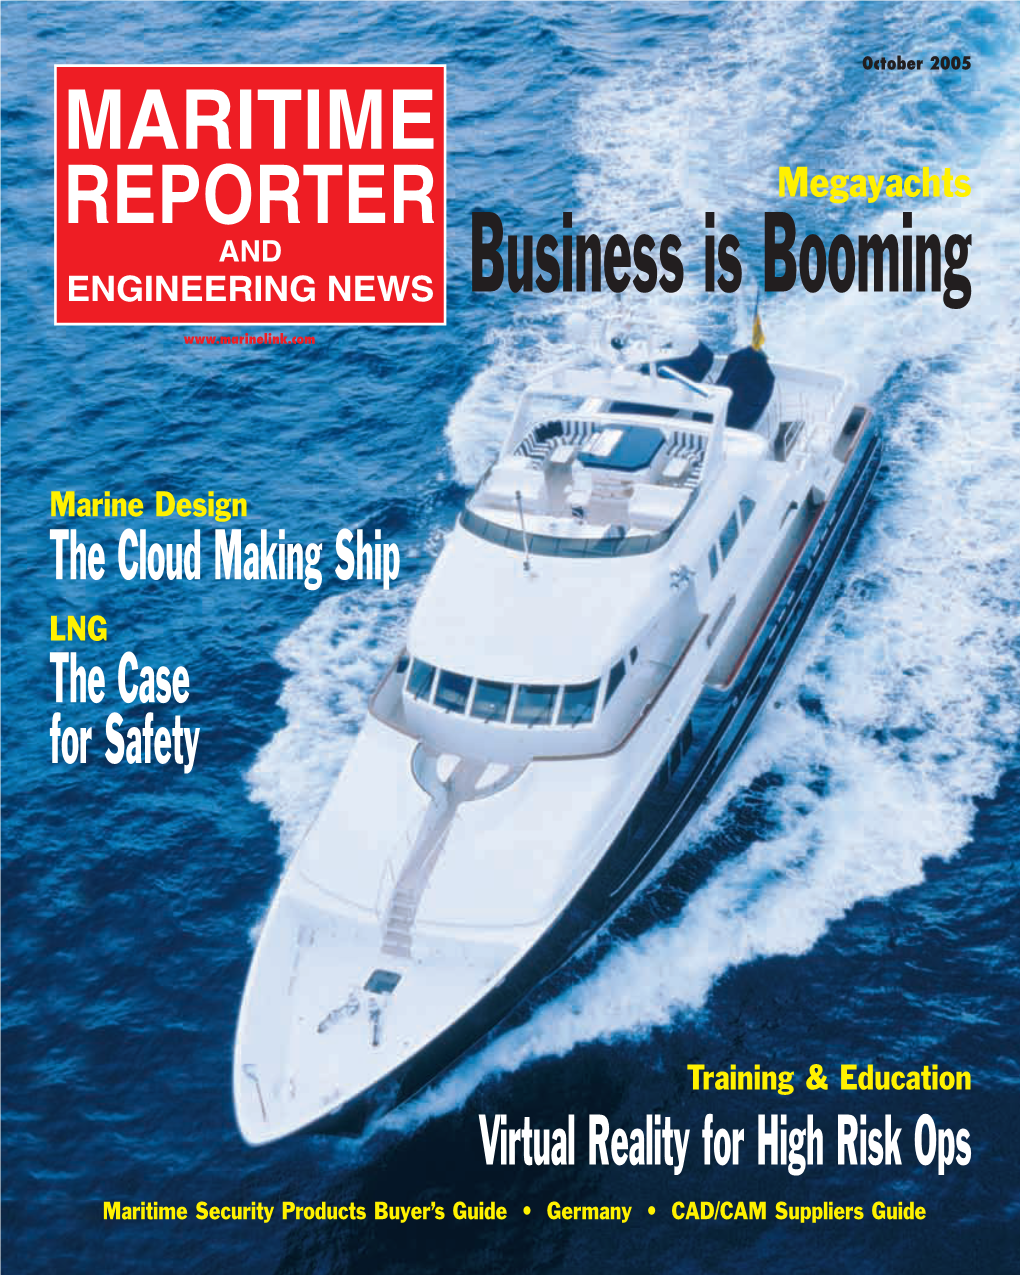 MARITIME REPORTER Megayachts and ENGINEERING NEWS Business Is Booming